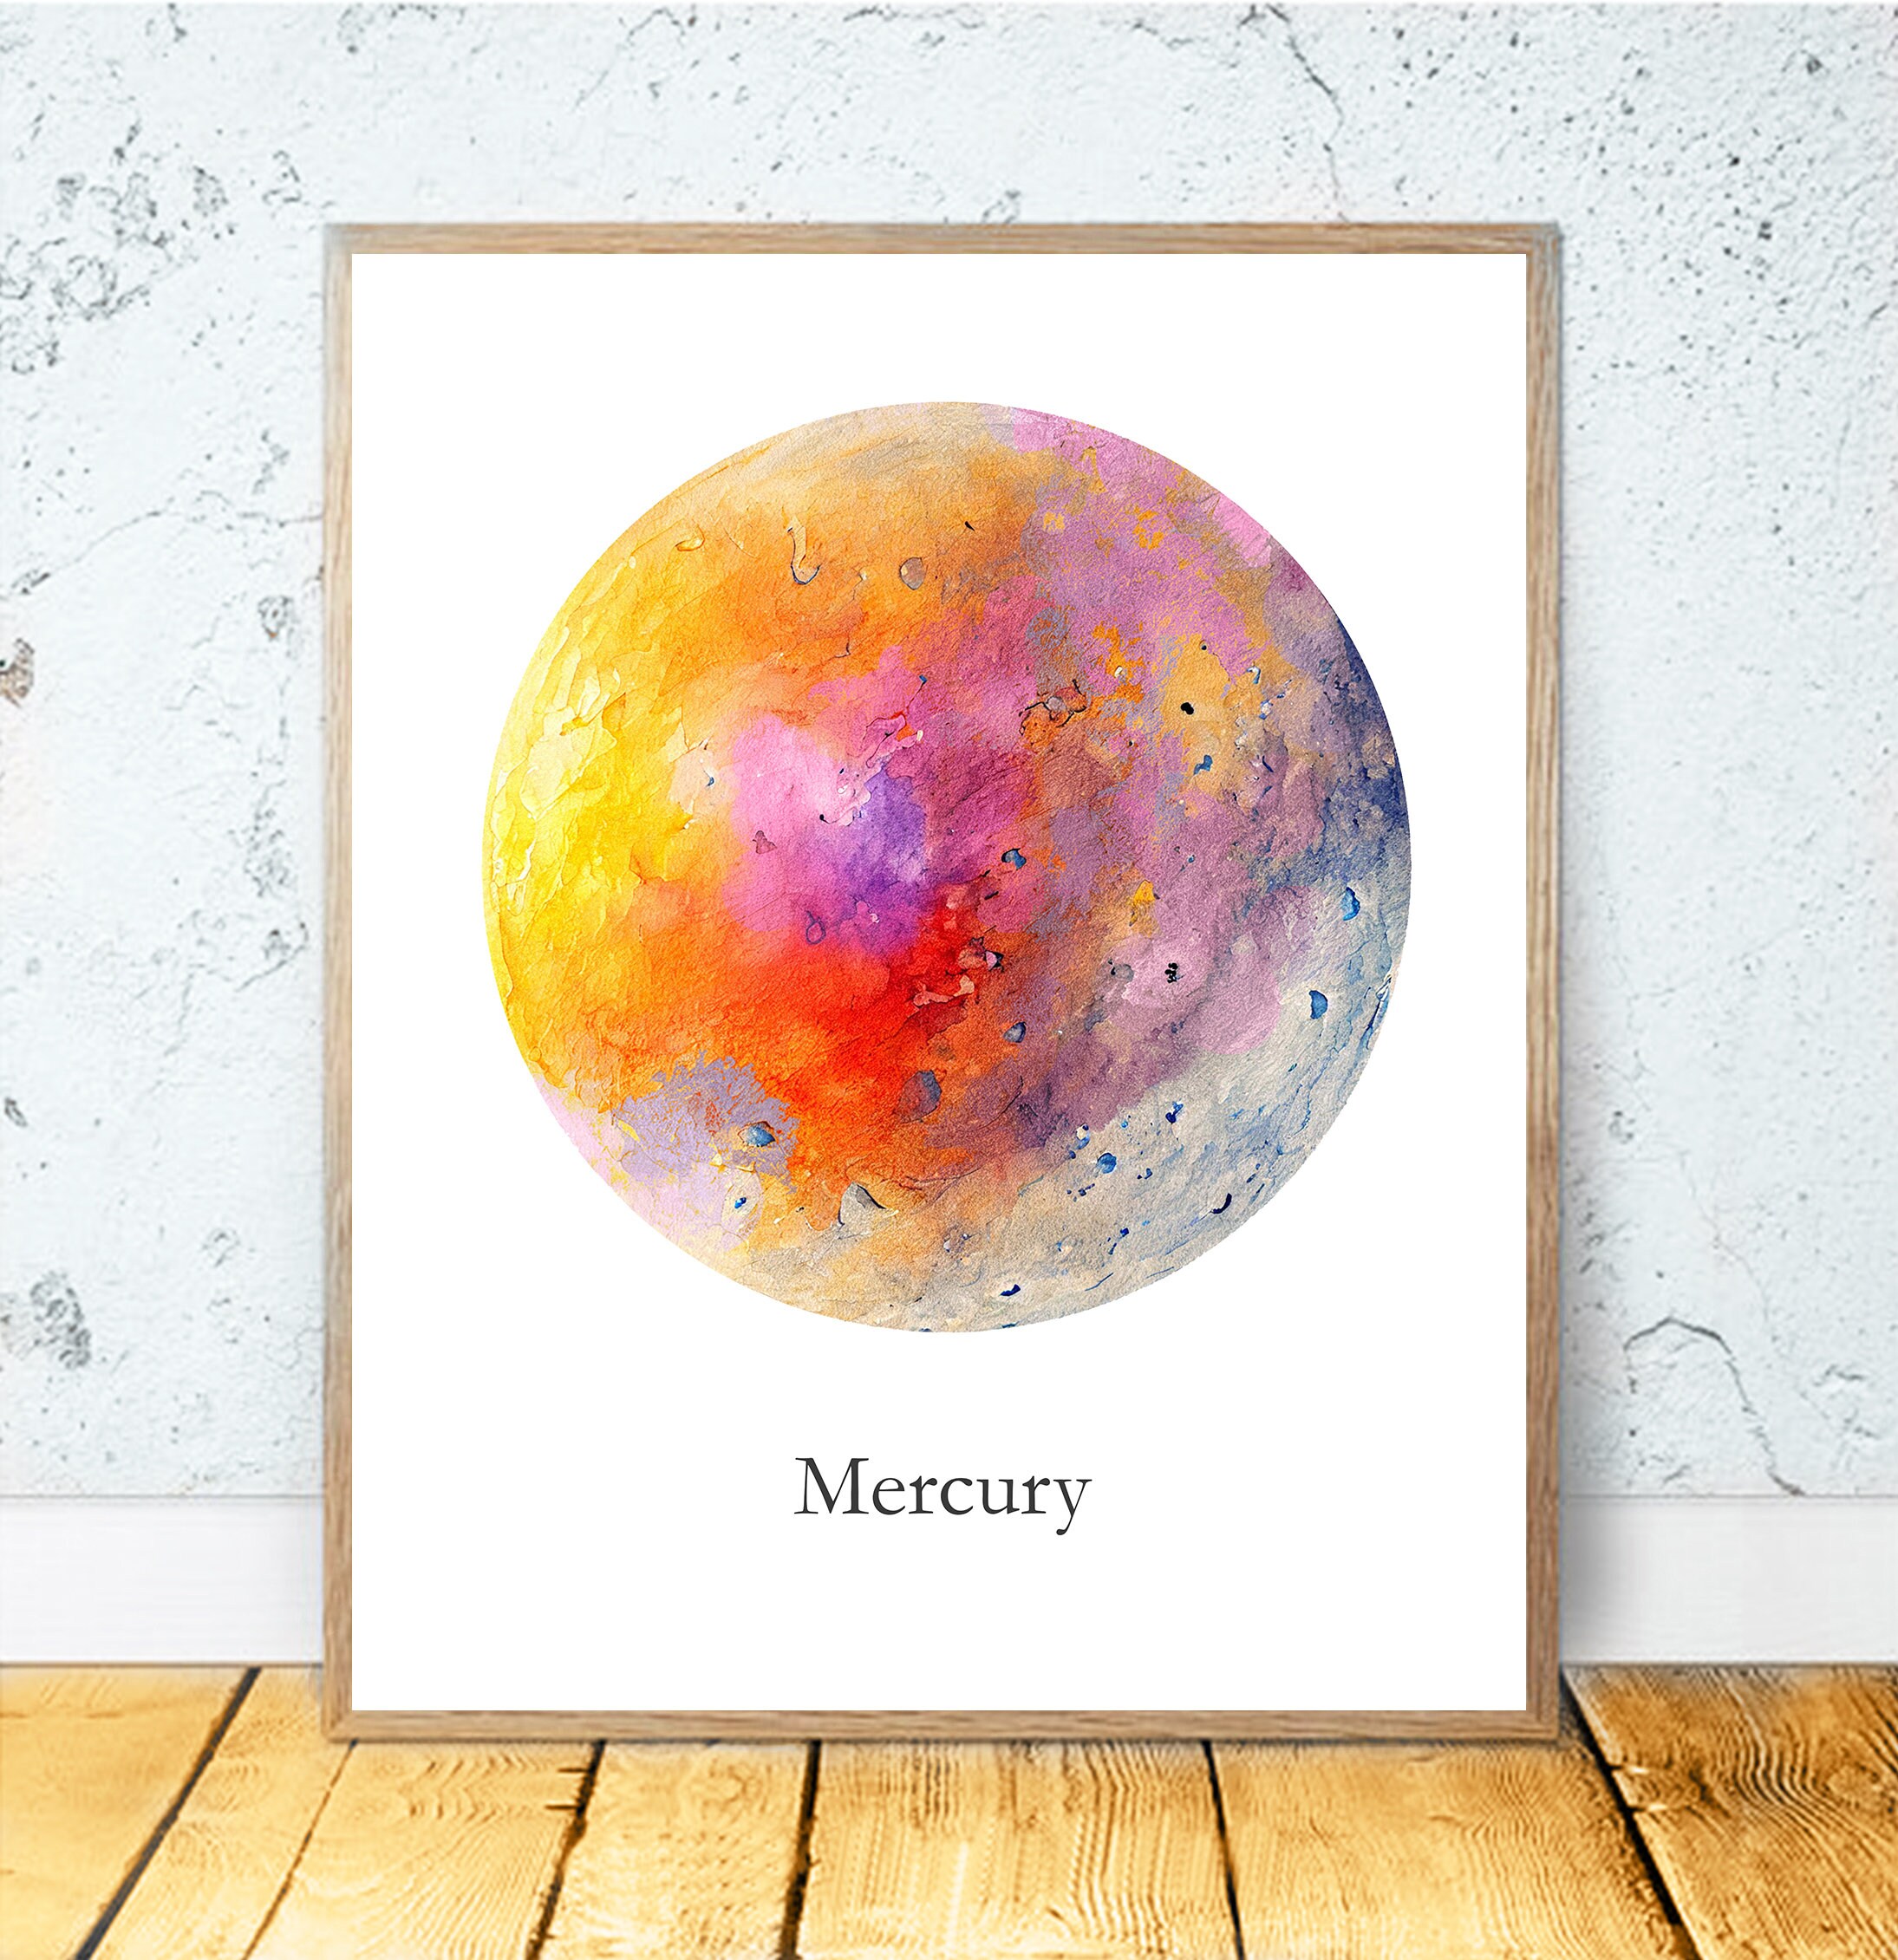 My Sticker Paintings: Planets: 10 Magnificent Paintings [Book]